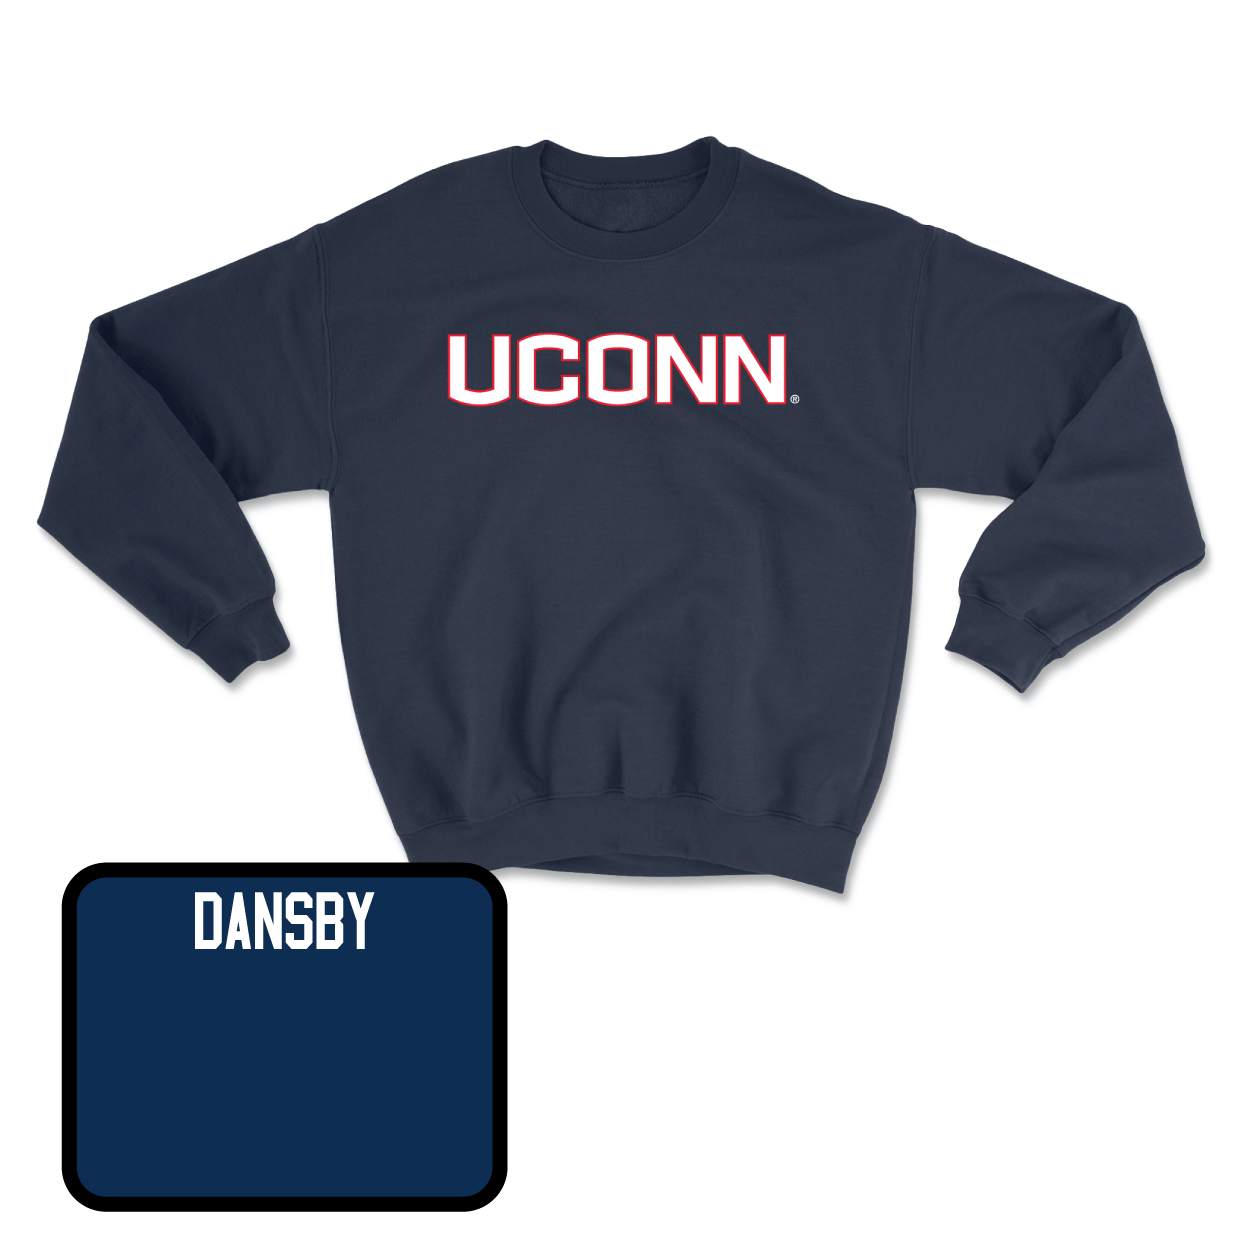 Navy Women's Track & Field UConn Crewneck Large / Mia Dansby